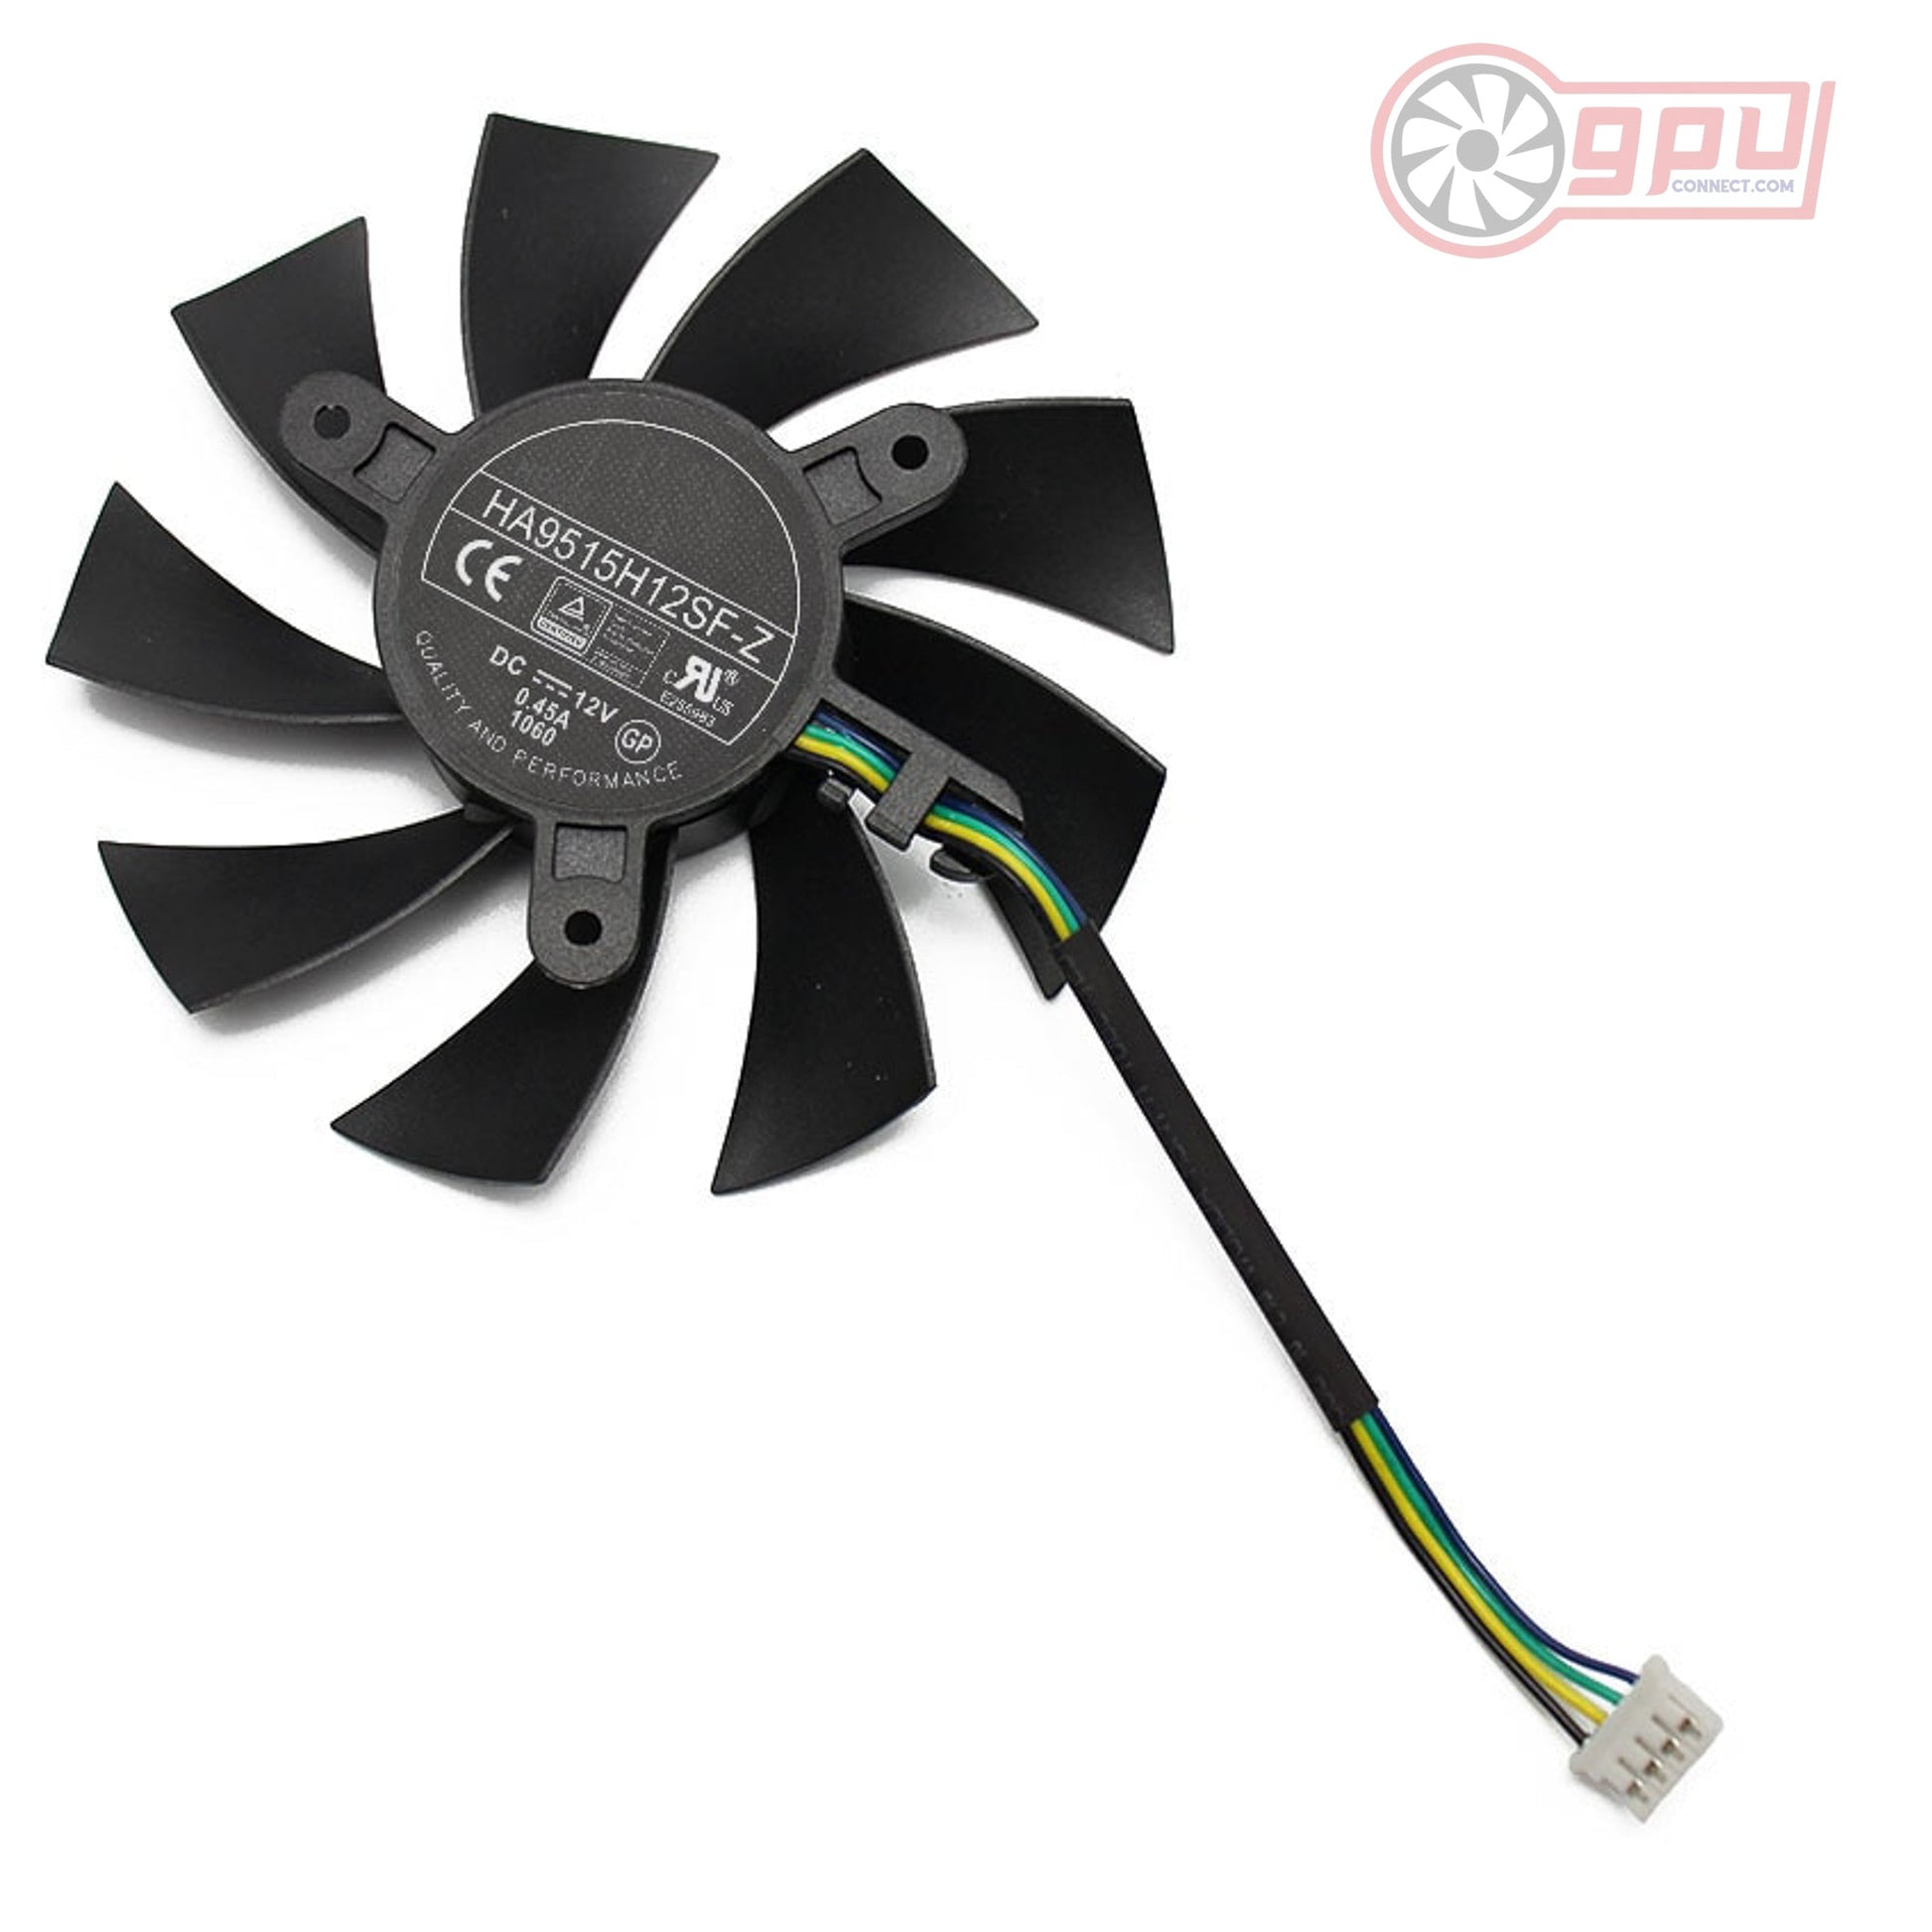 afslappet Halvkreds Supersonic hastighed MSI GTX 1060 GT 950 ITX OC - Replacement Fan